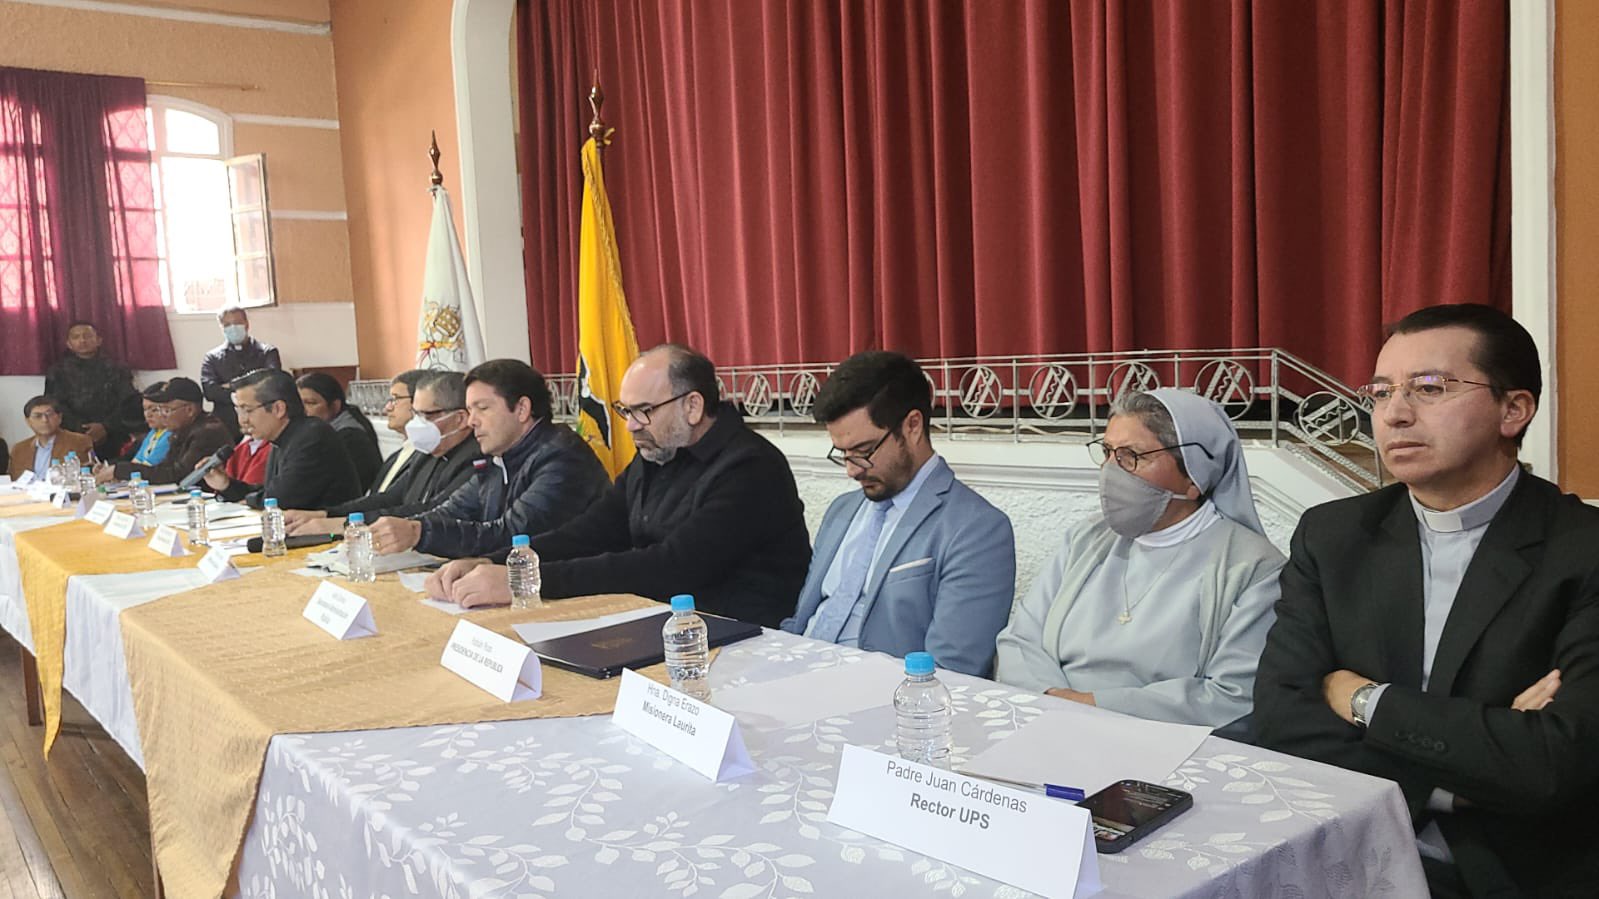 Authorities from the government, the Confederation of Indigenous Peoples, the church and civil society attended the dialogue.